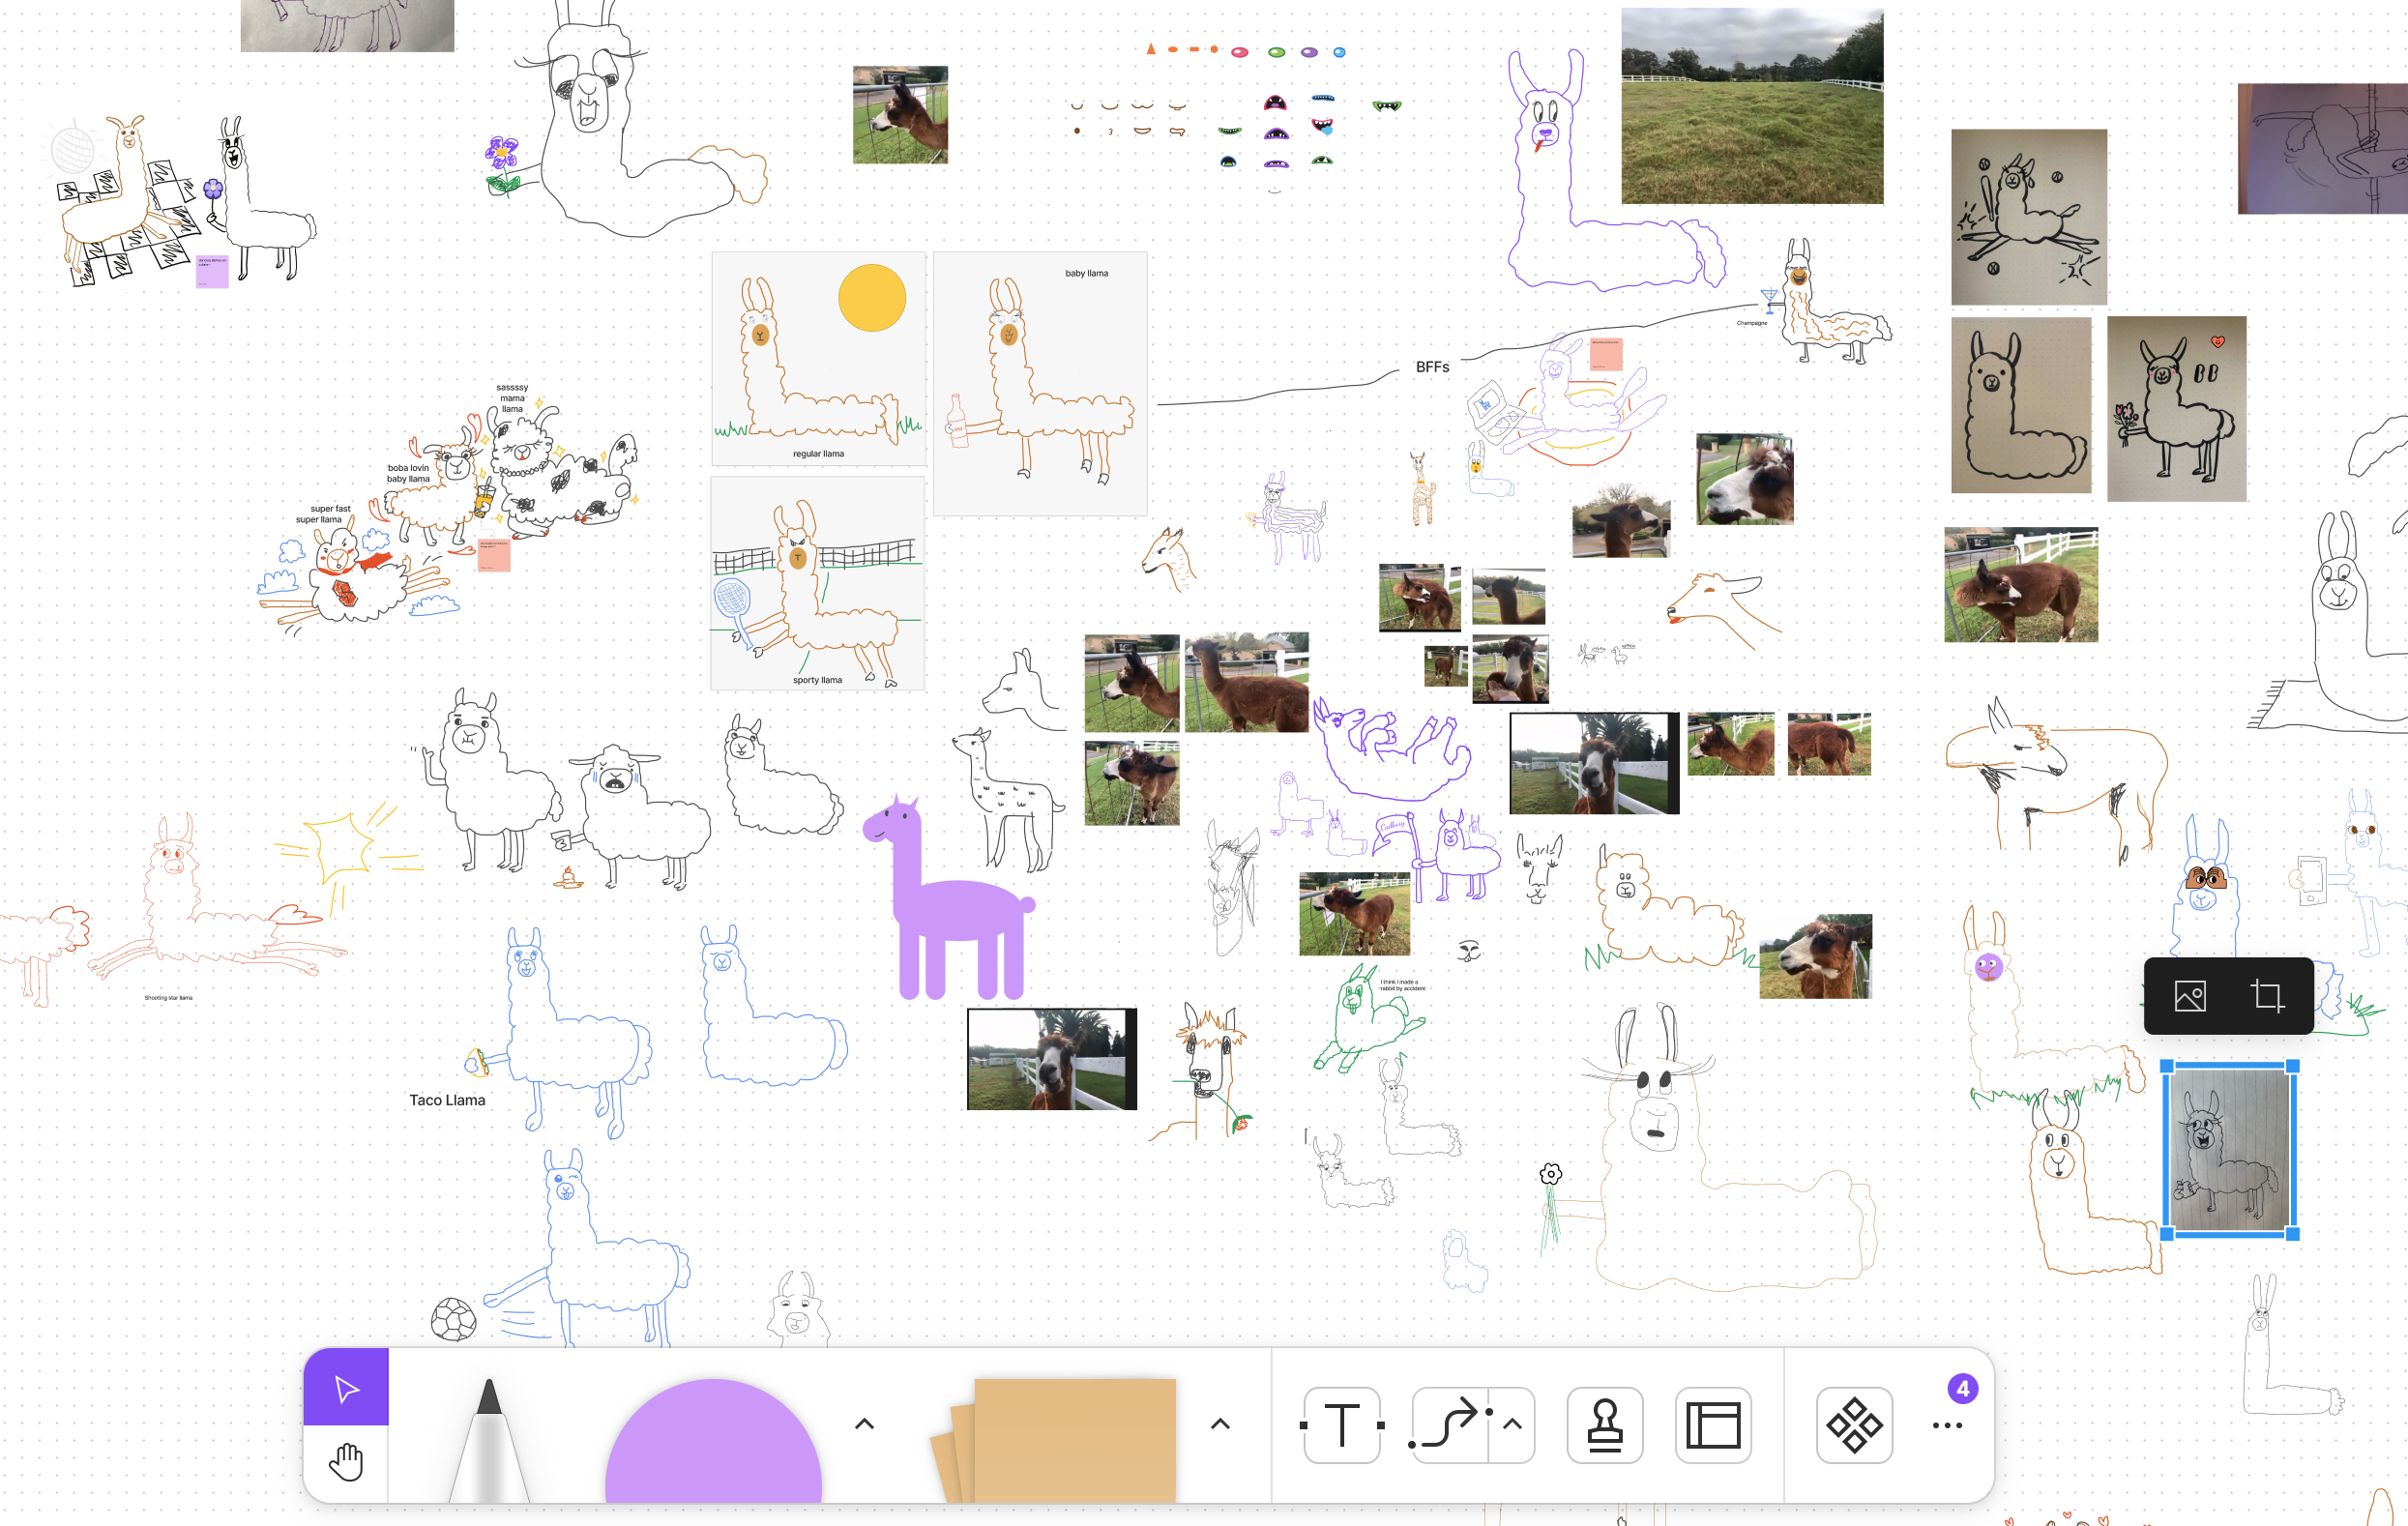 Screenshot of Figma file with many images of llamas and doodles